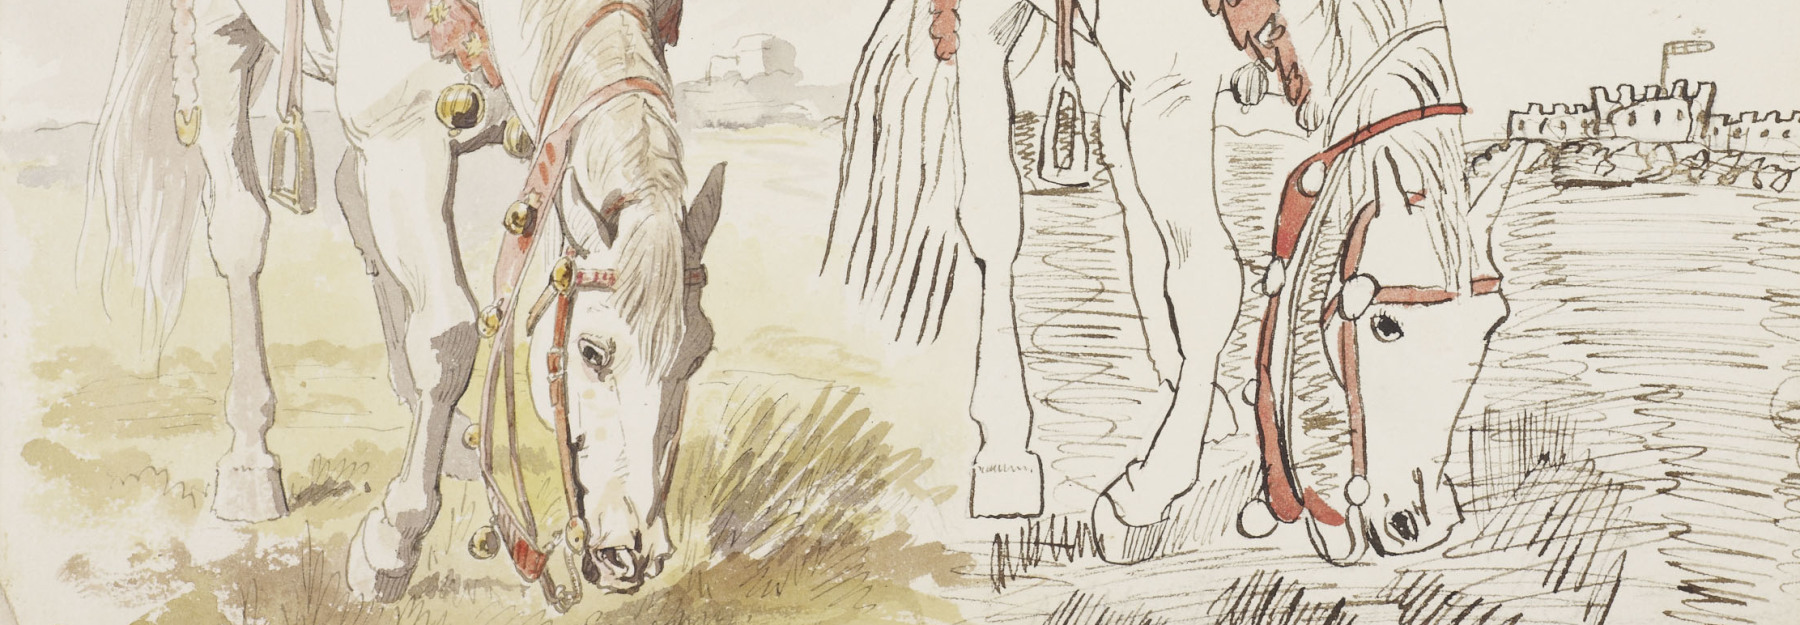 horse sketched by Edward VII